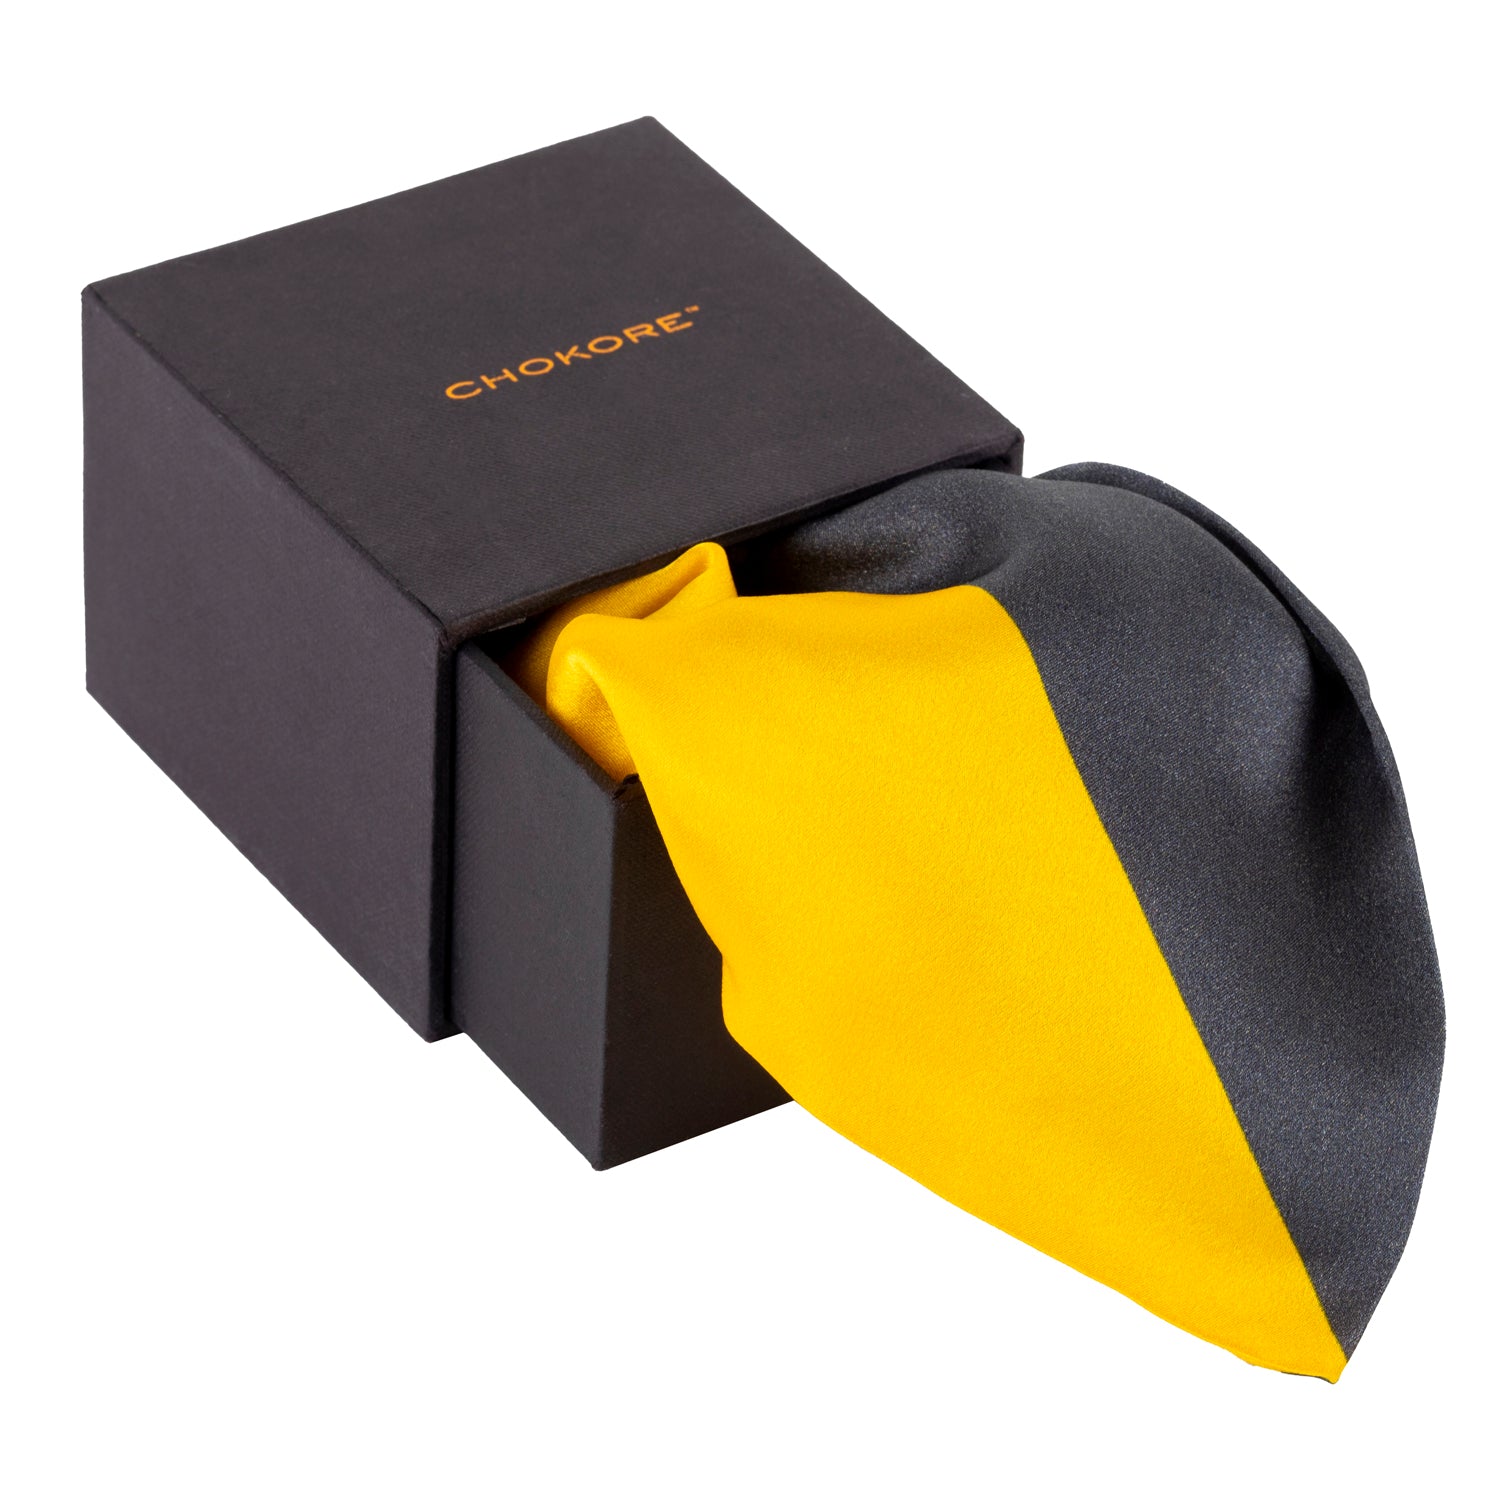 Chokore Yellow Satin Silk pocket square from the Plaids Line